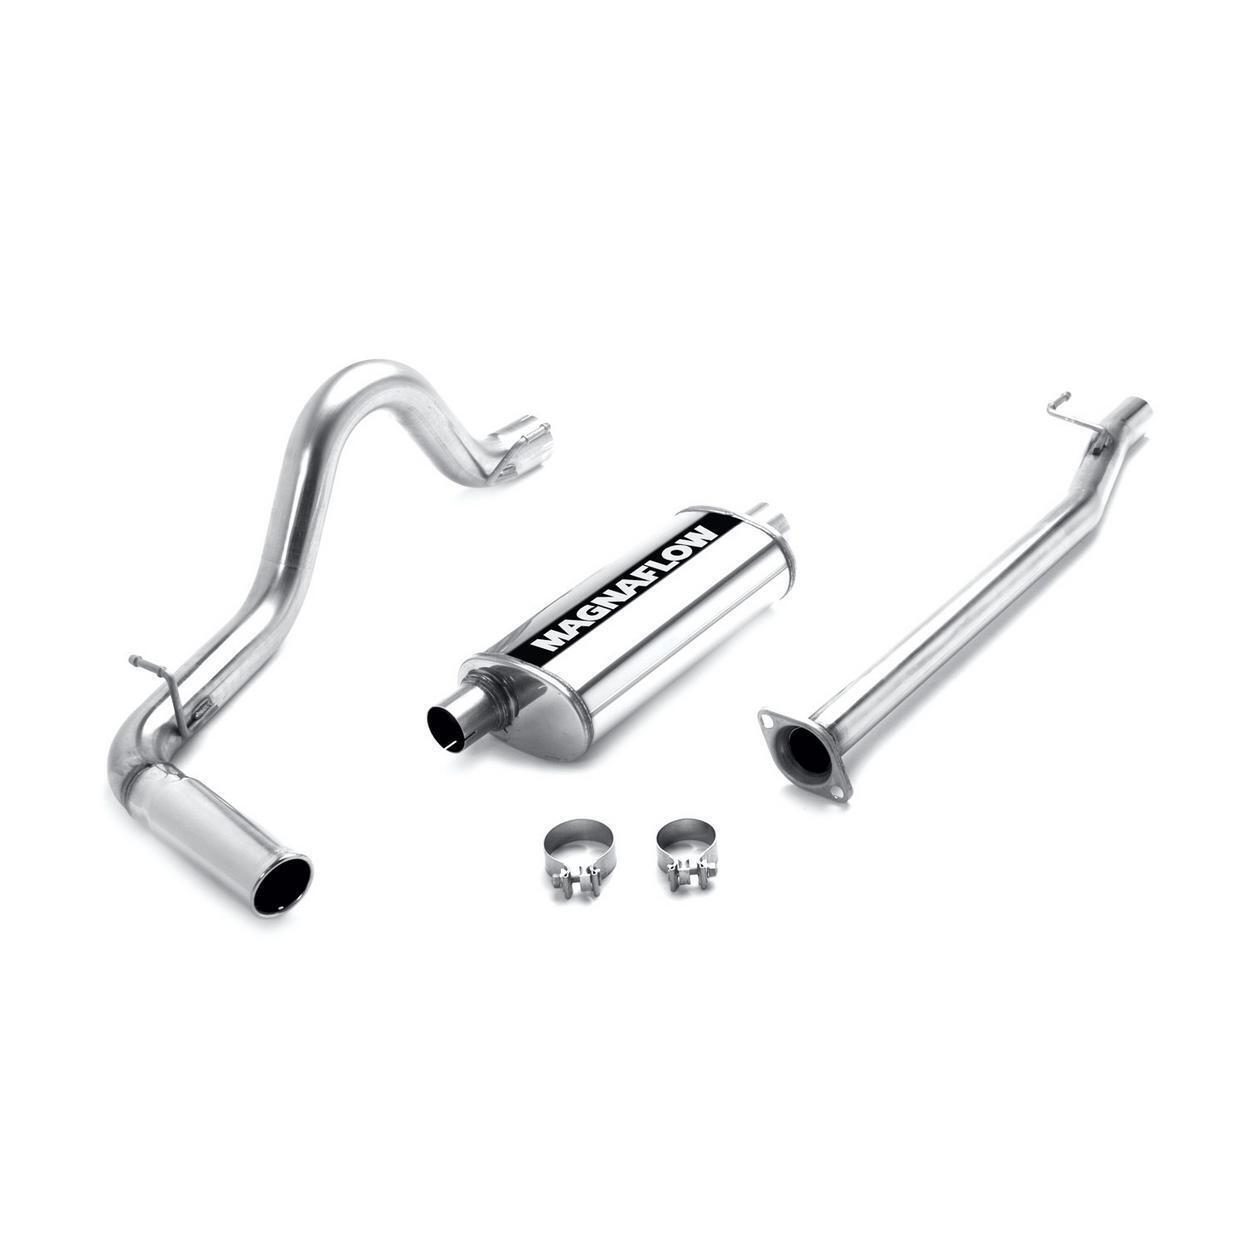 MagnaFlow Exhaust System Kit - Fits: 2005-2012 Toyota Tacoma Street Series Stain